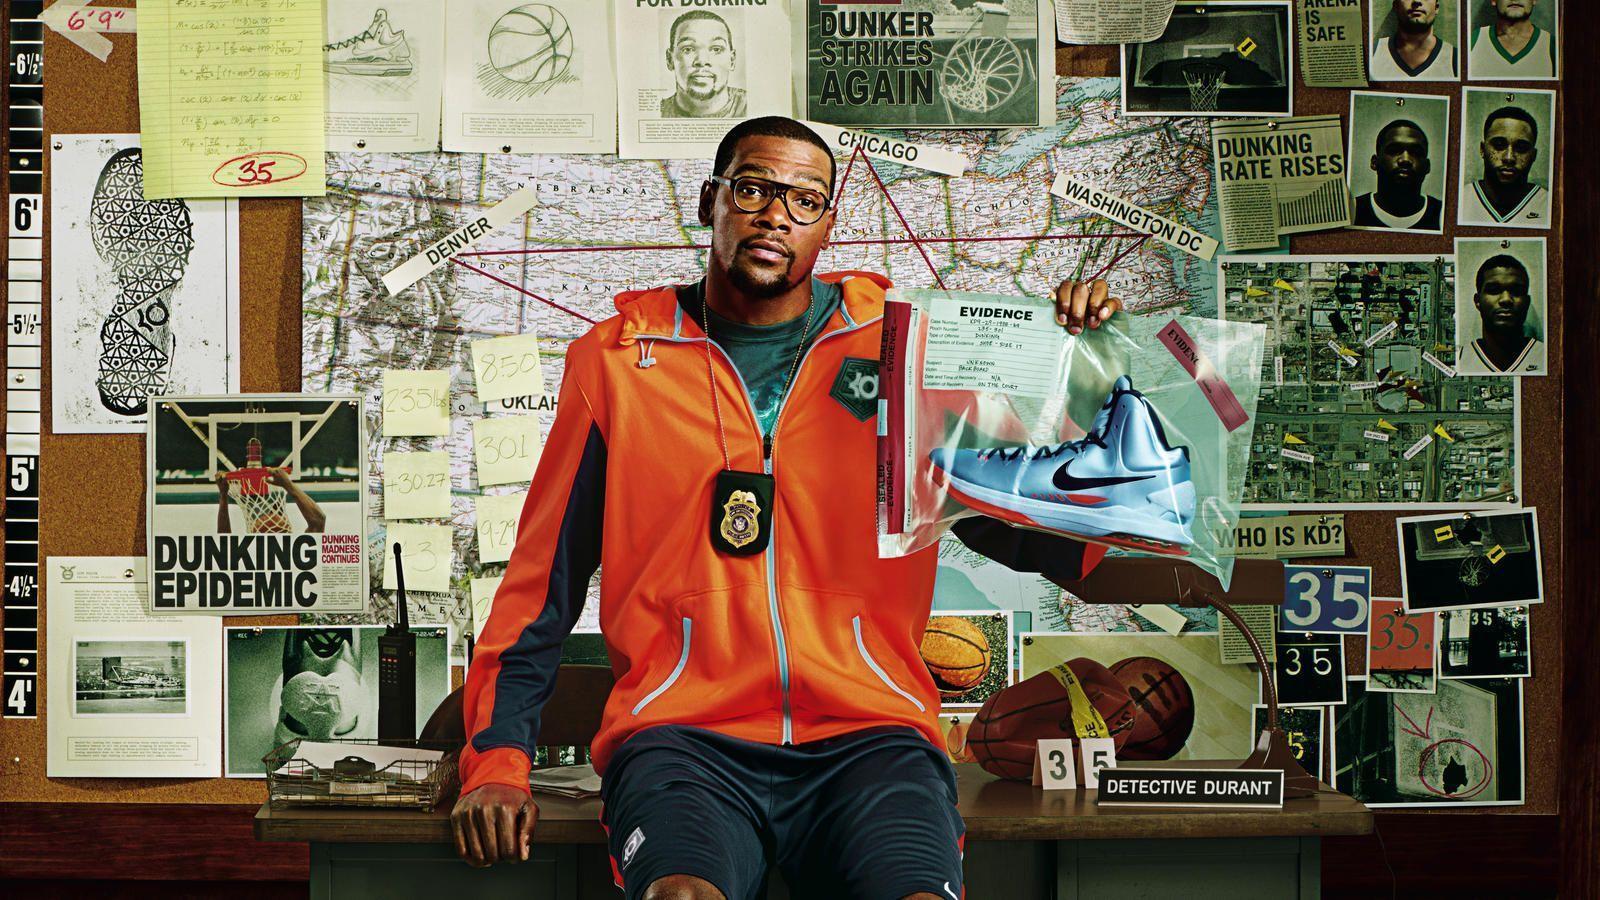 Nike News TV spot confirms: Kevin Durant is not nice